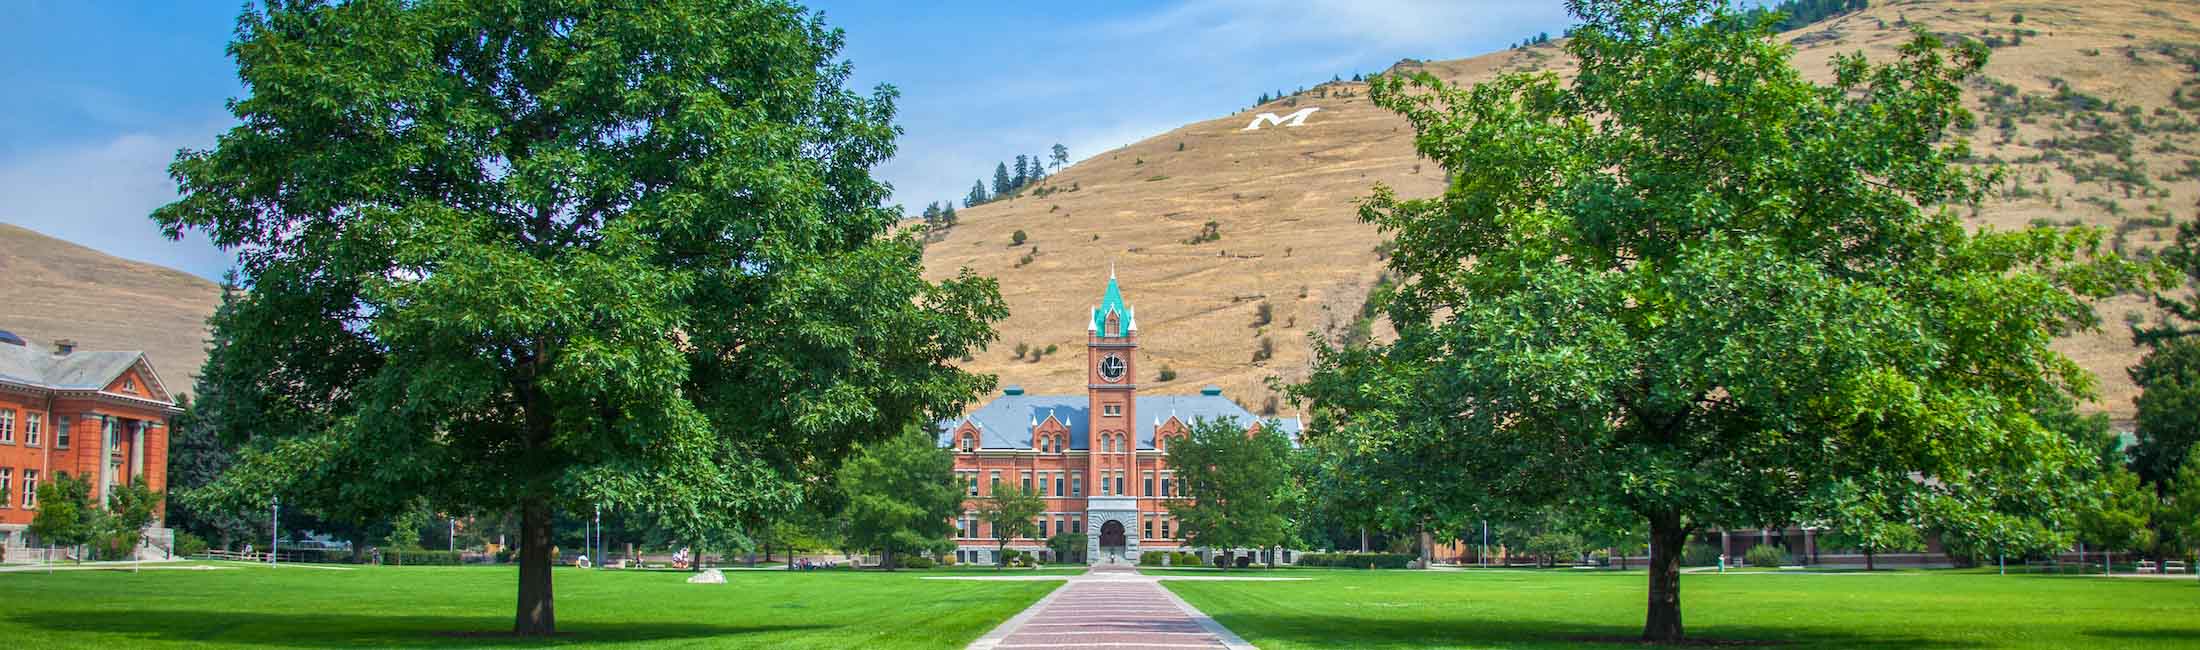 University of Montana Top Academic Institute in State and Among Best in World